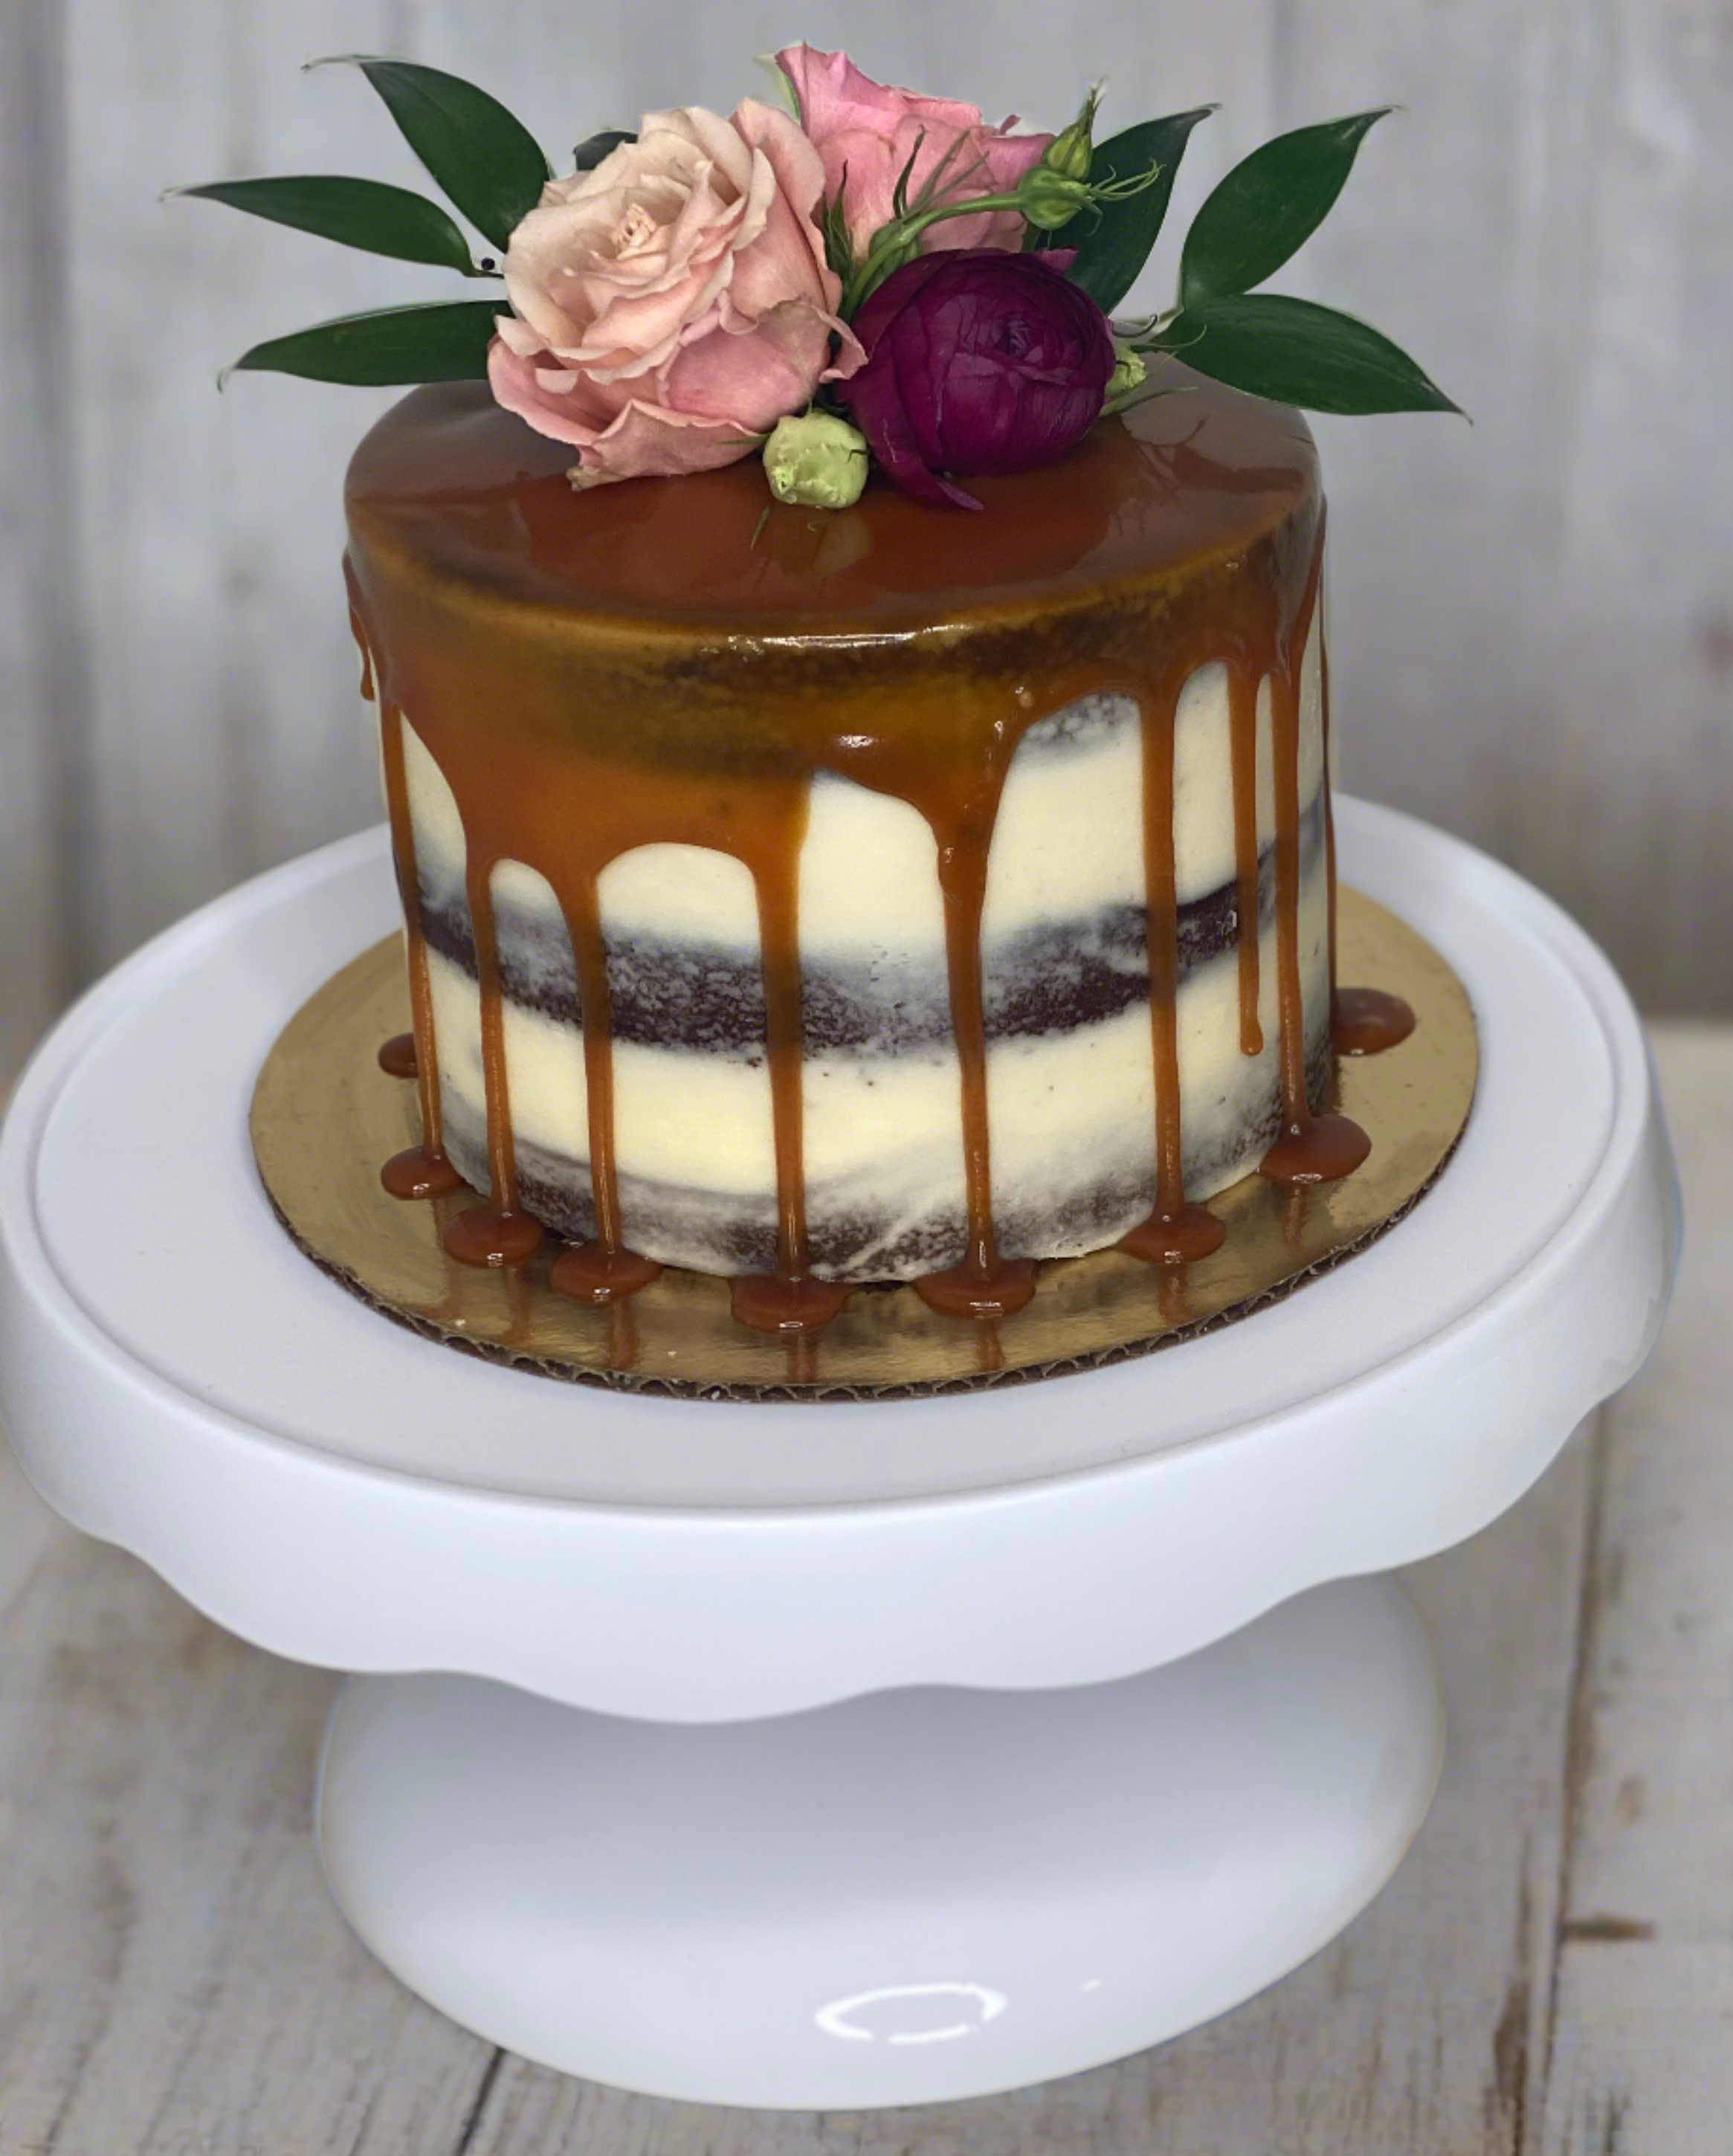 Gorgeous 10” 2-in-1 Pedestal Cake Stand and Serving Plate.